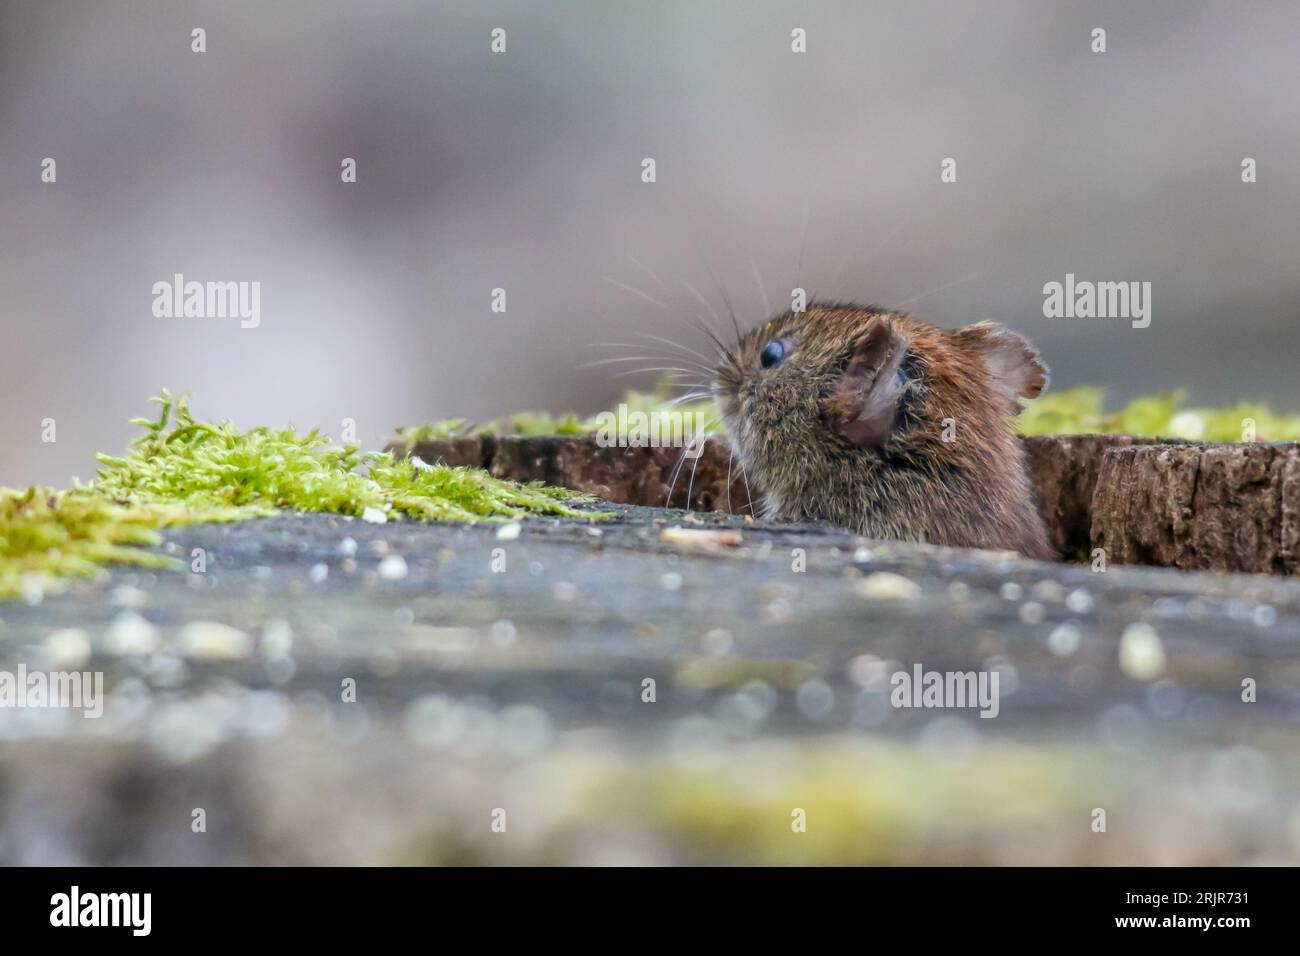 A pygmy field mouse on a stump surveying its surroundings. Stock Photo